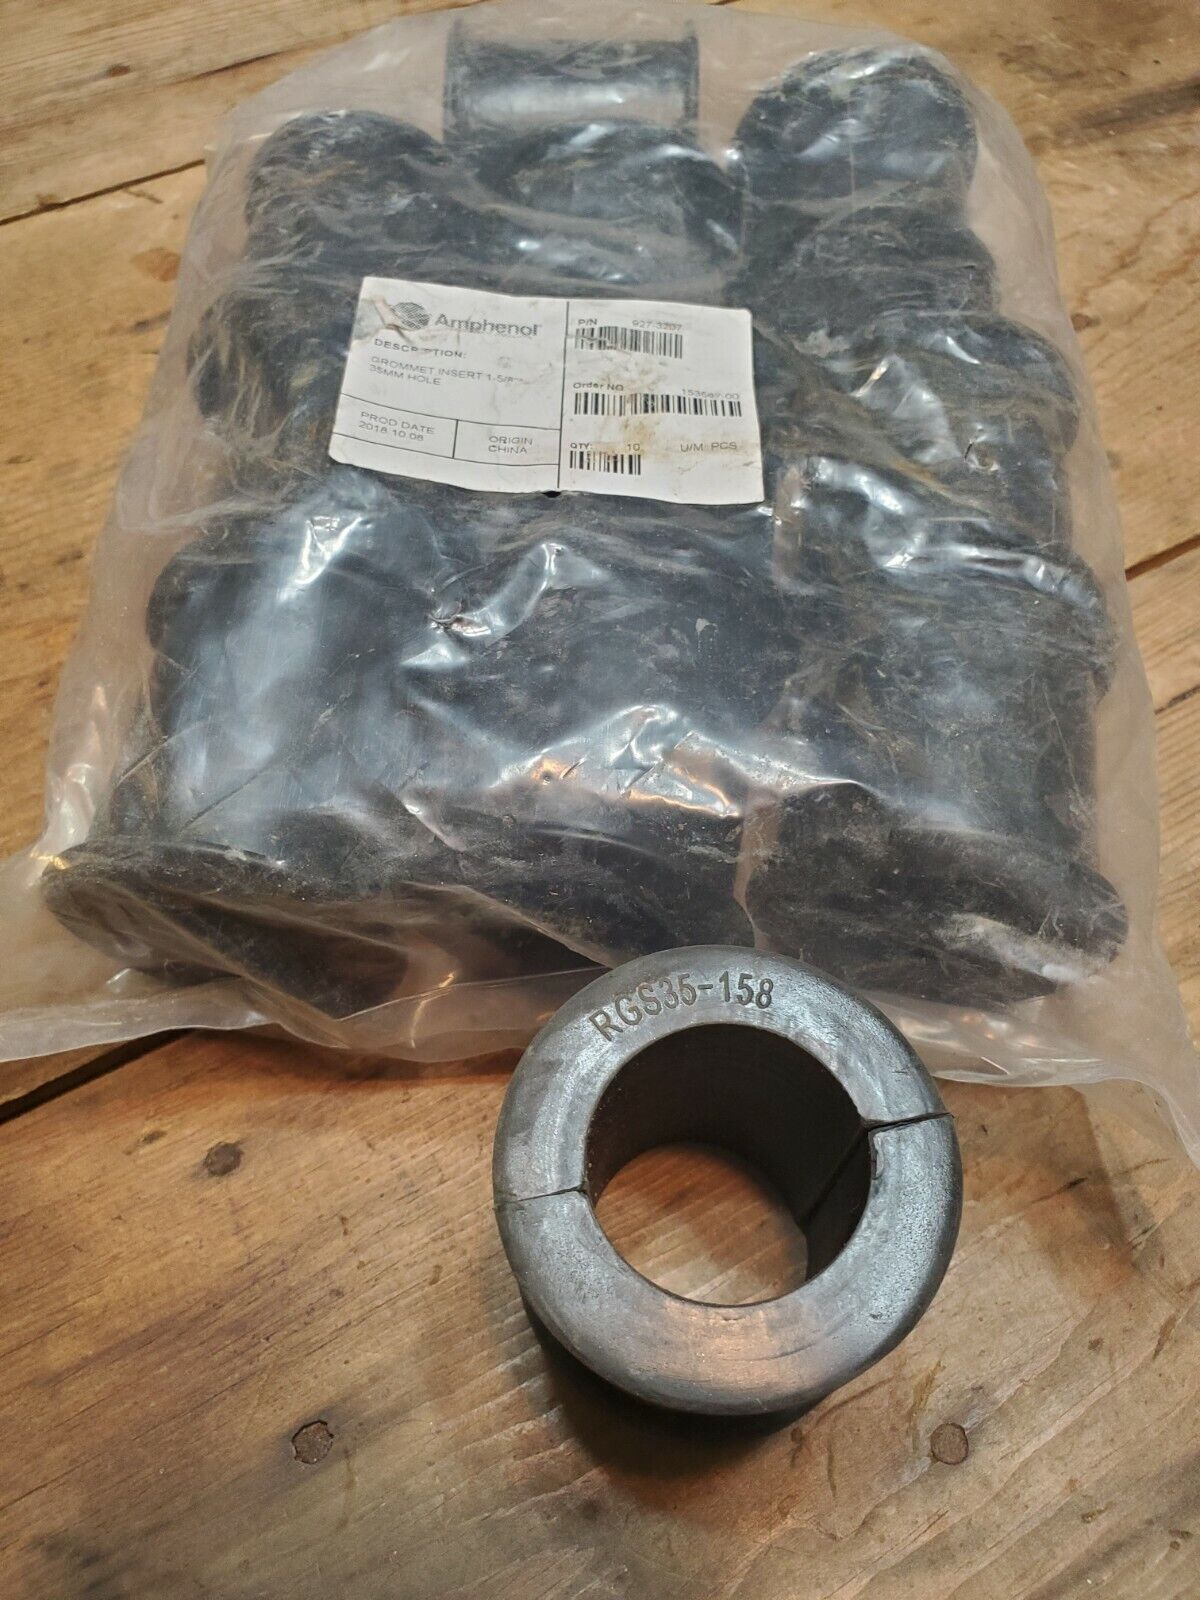 Big Hole Grommets For 1-5/8" Snap-in Hanger 35mm Hole Rgs35-158 Kit Of 10